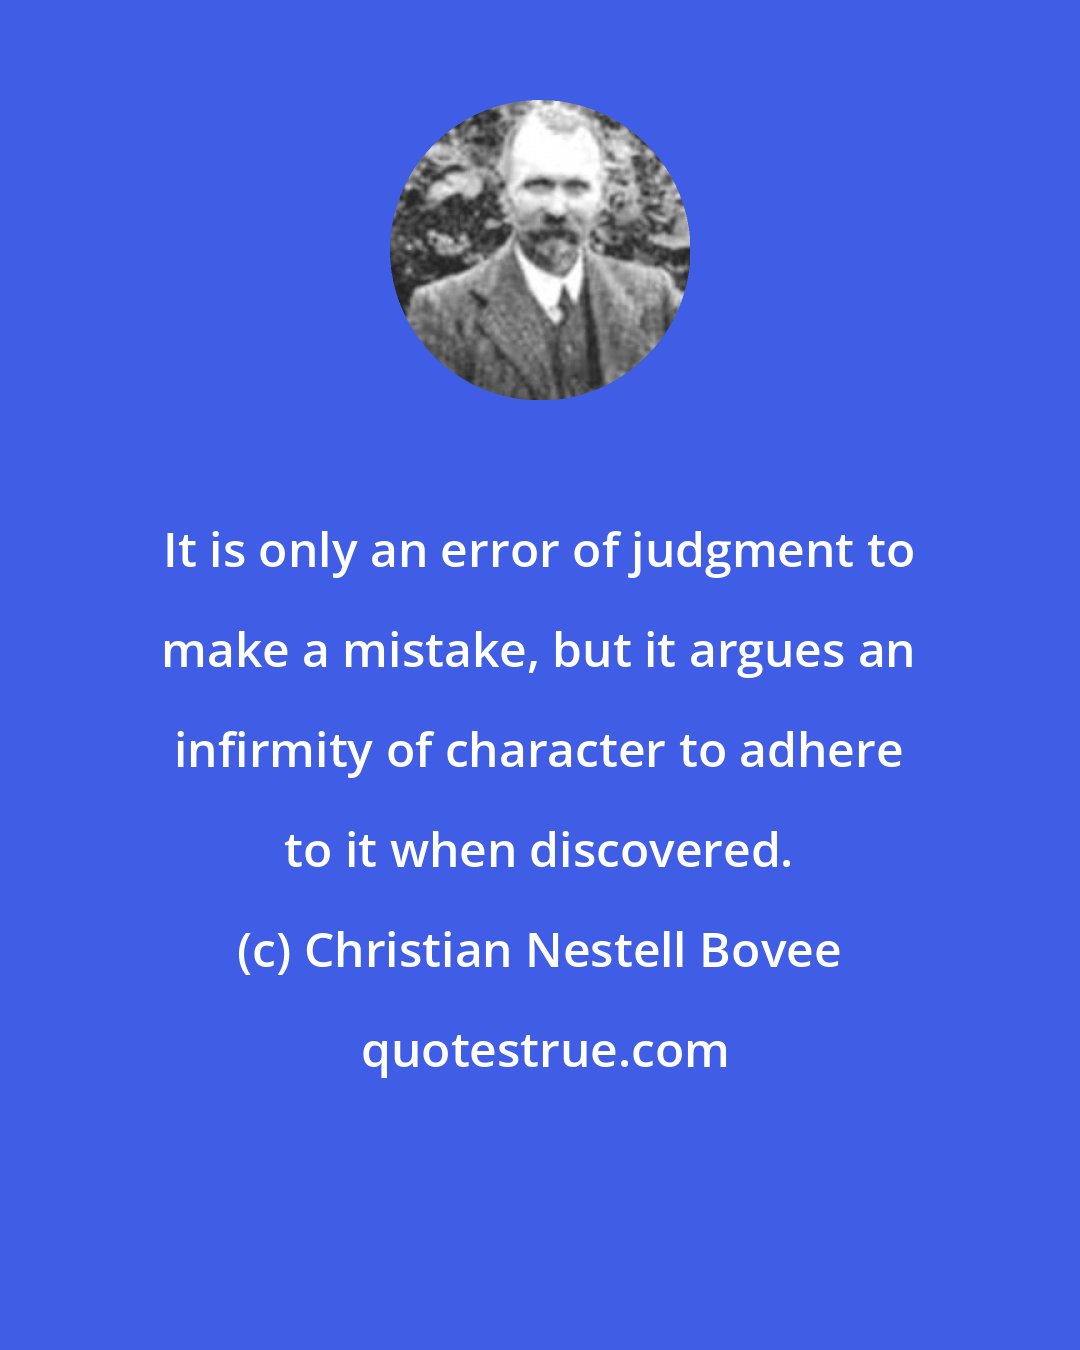 Christian Nestell Bovee: It is only an error of judgment to make a mistake, but it argues an infirmity of character to adhere to it when discovered.